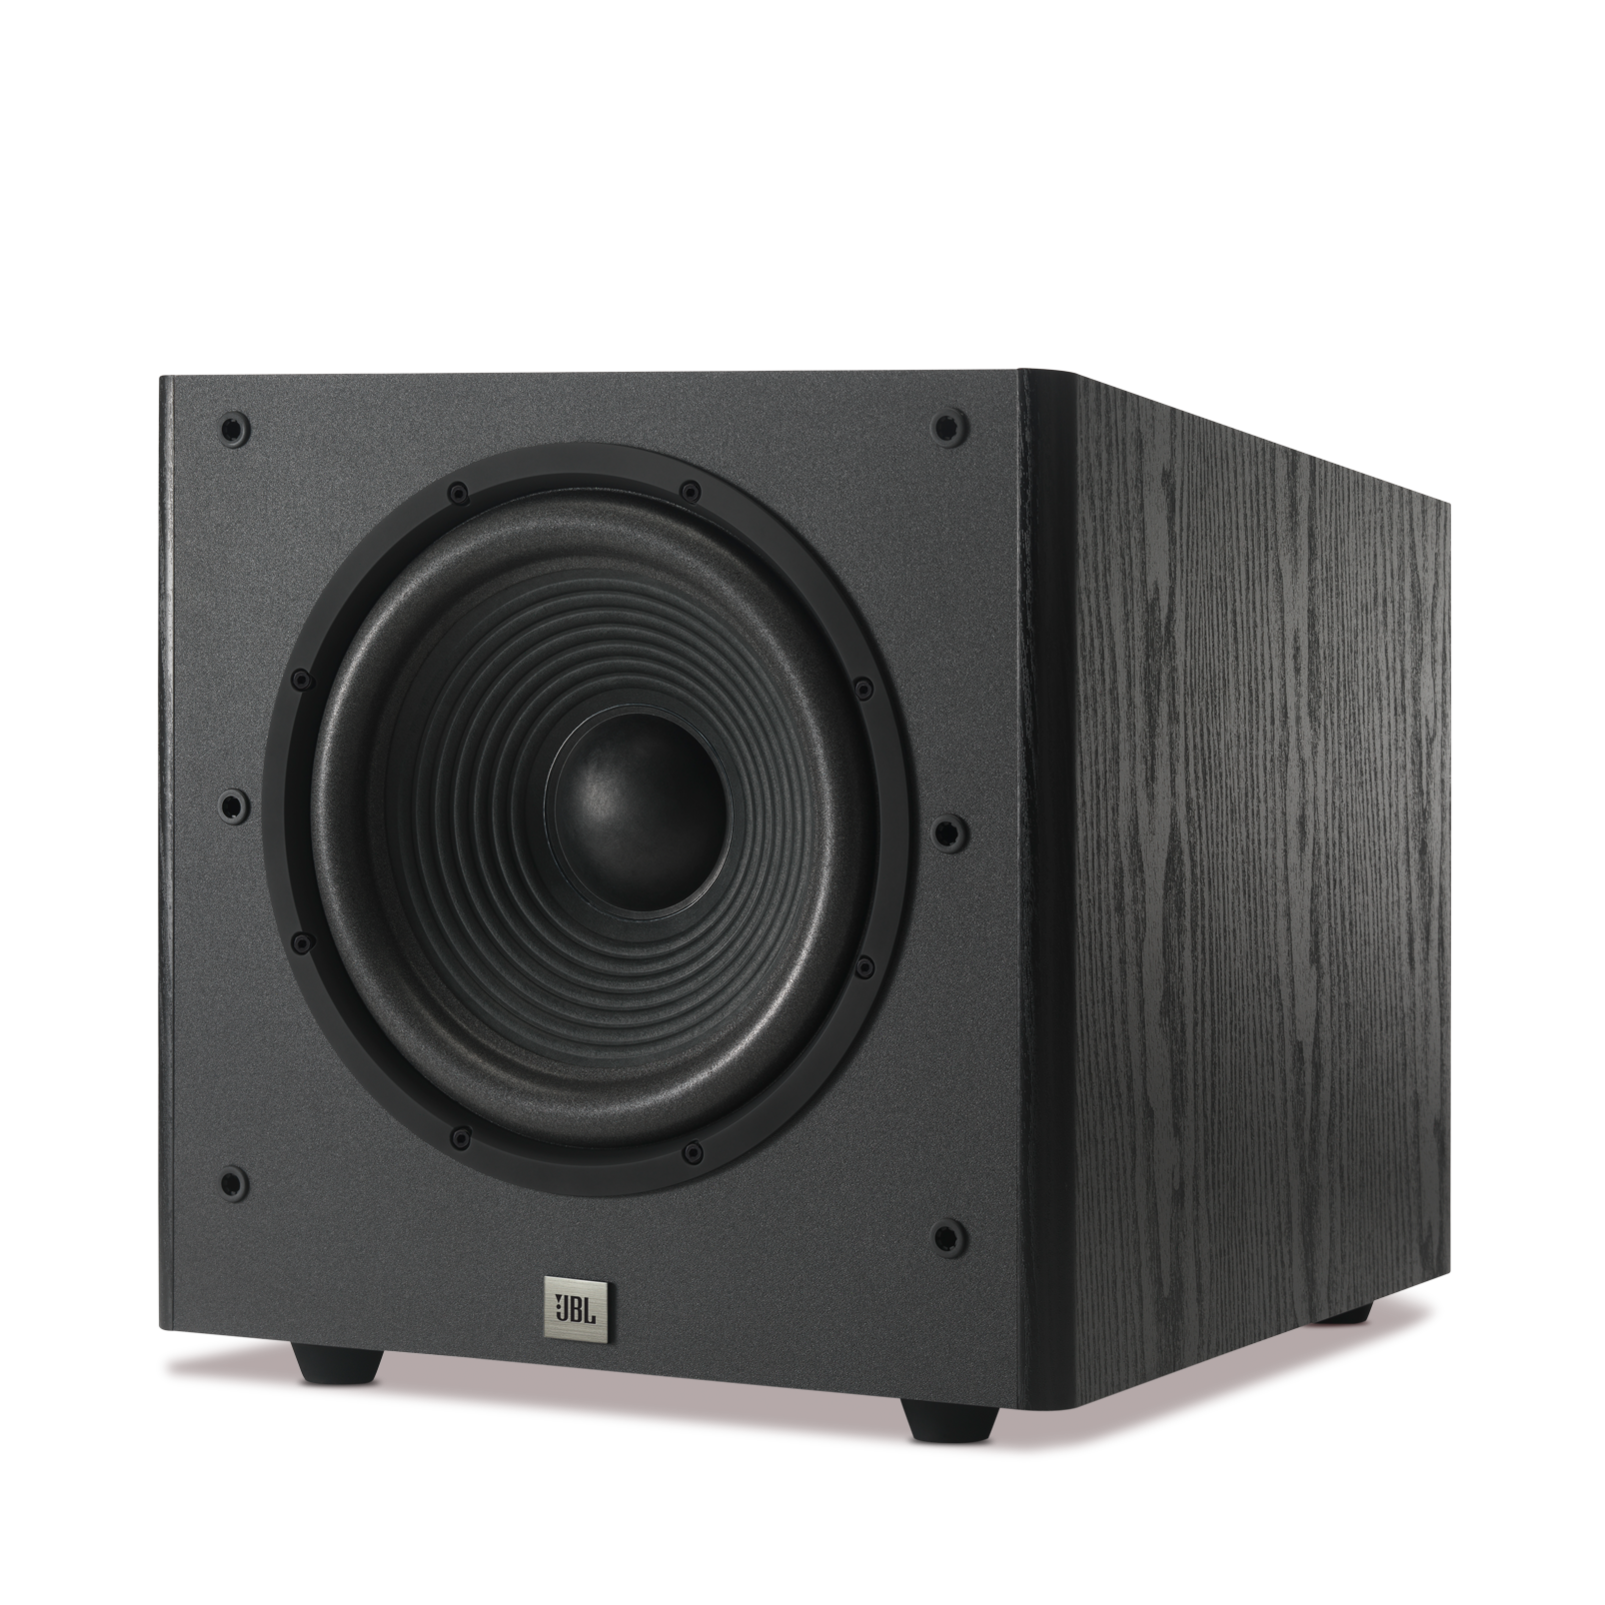 Arena Sub 100p Powerful Standard Setting Bass At An Affordable Price